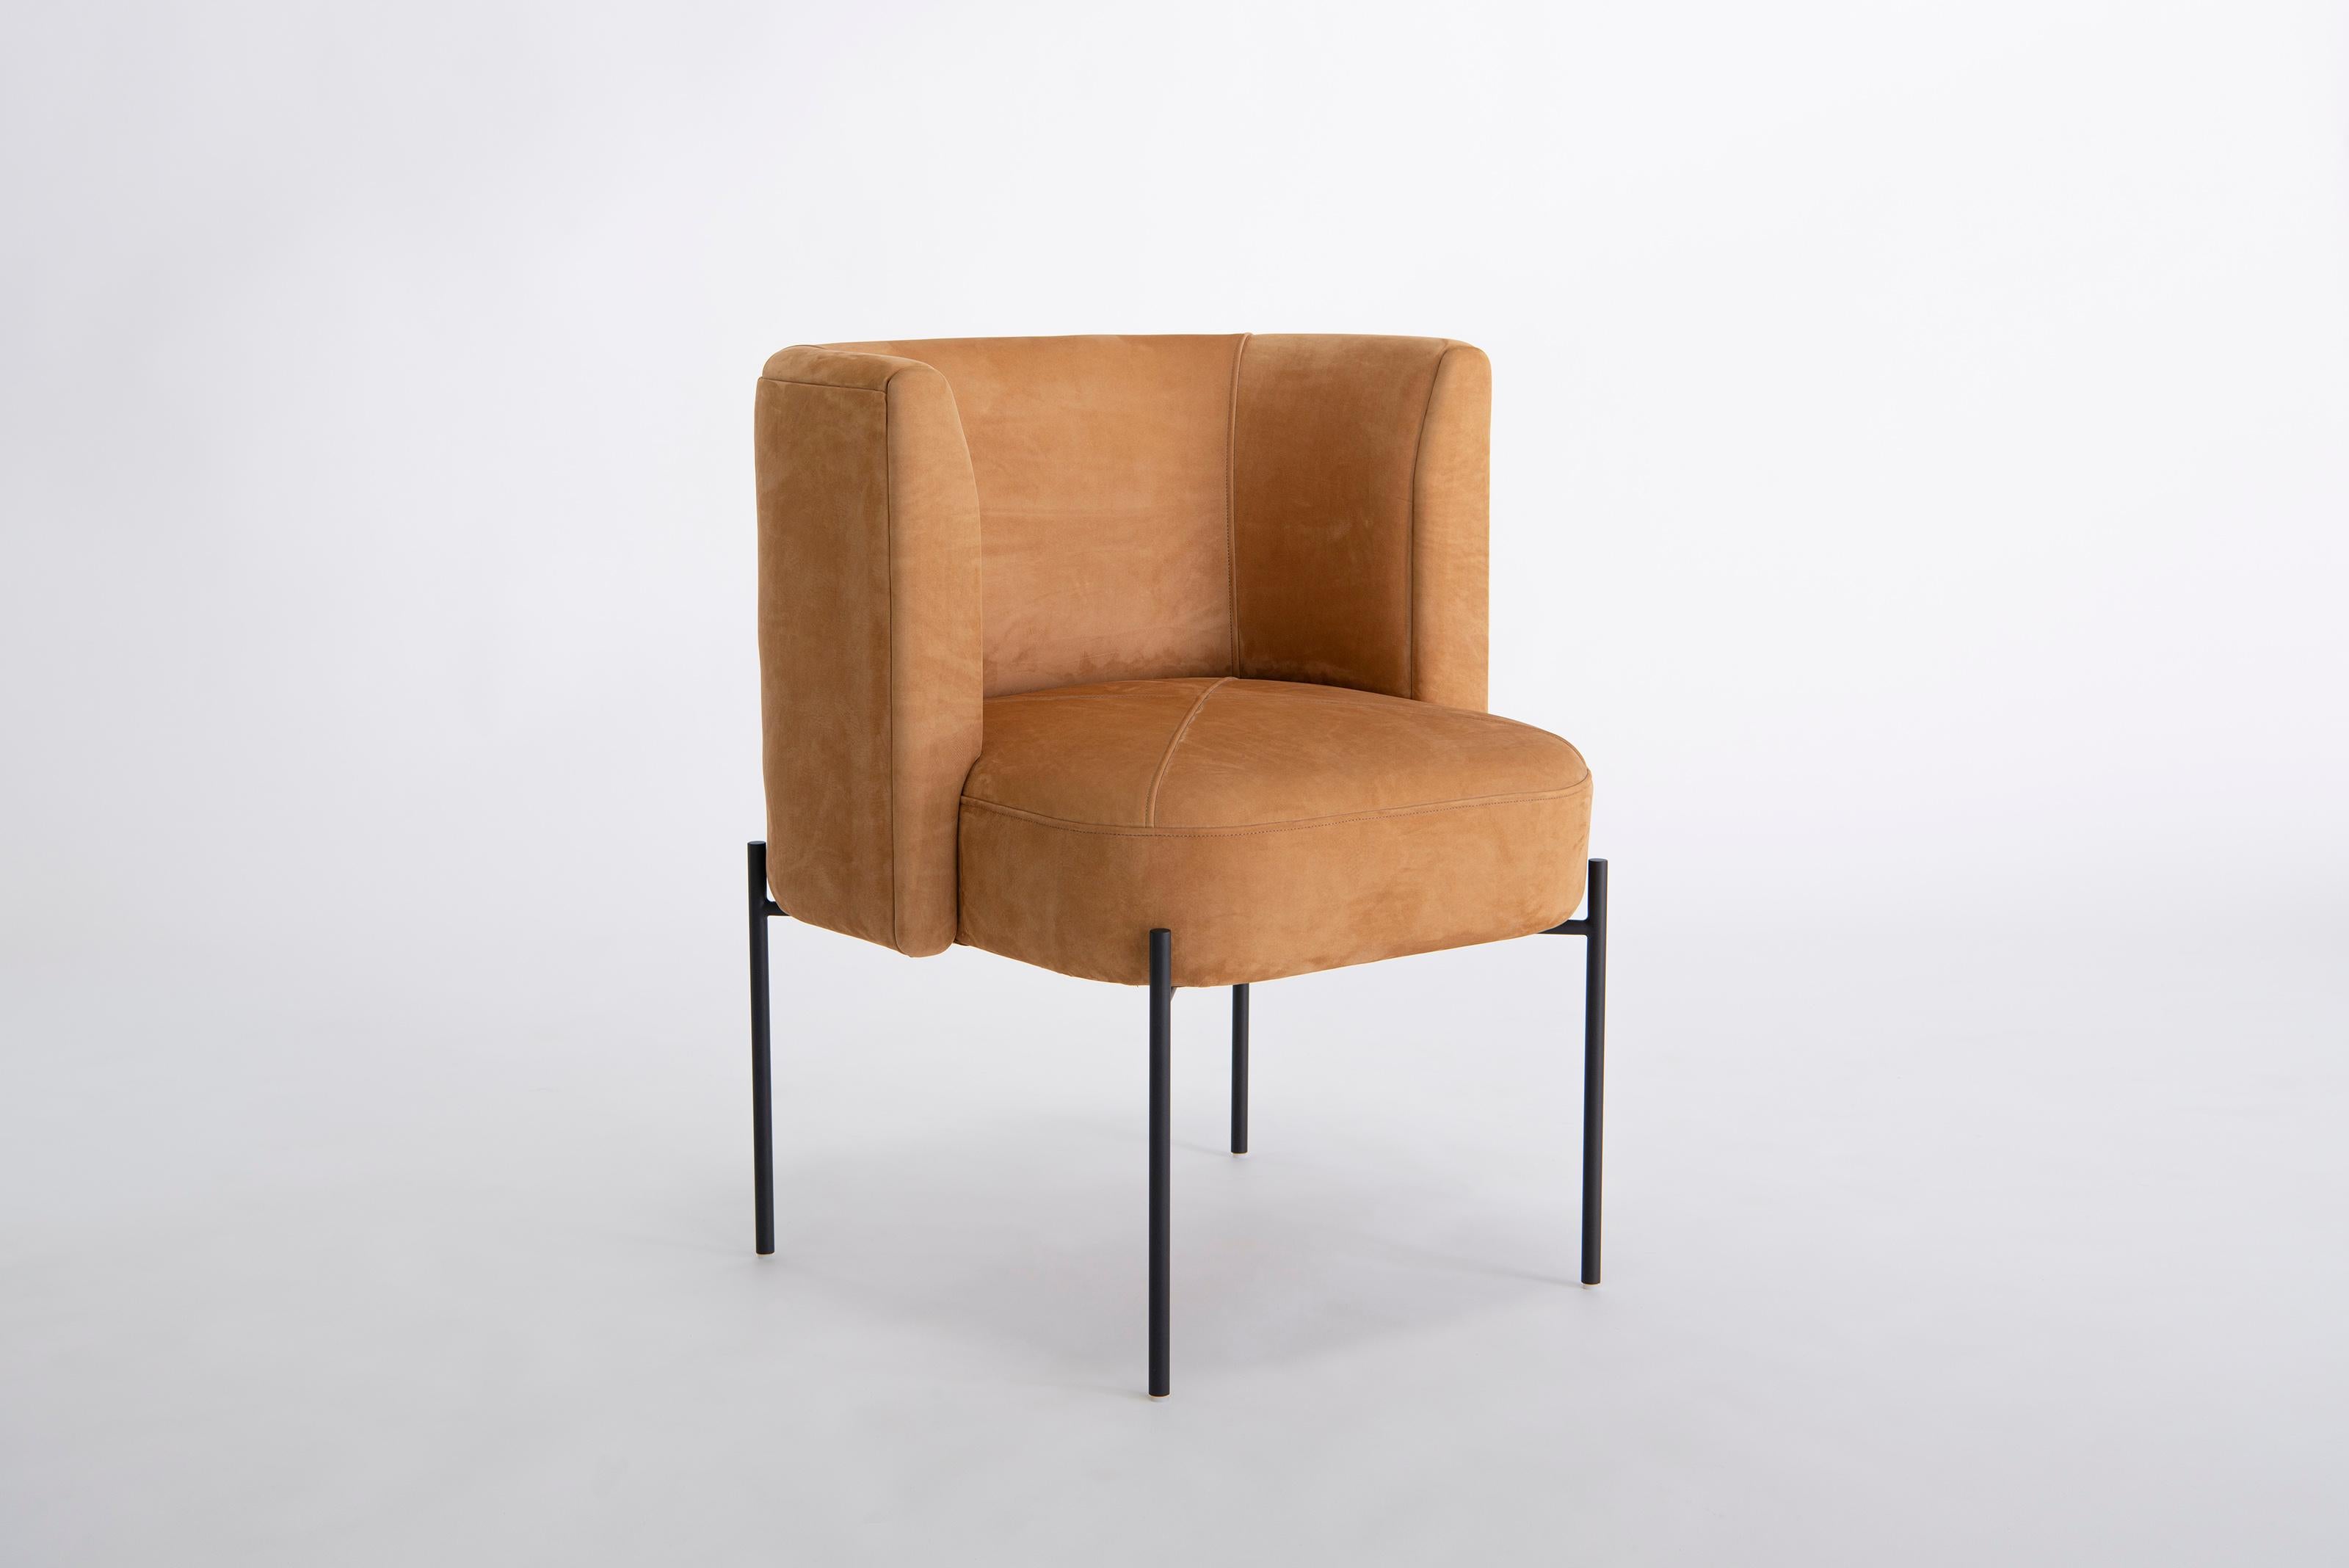 Capper Side Chair With Metal Base by Phase Design
Dimensions: D 56 x W 61 x H 76,2 cm. 
Materials: Upholstery, wood and powder-coated steel.

Wood construction with upholstered body. May be specified with or without a swivel base. Upholstery may be